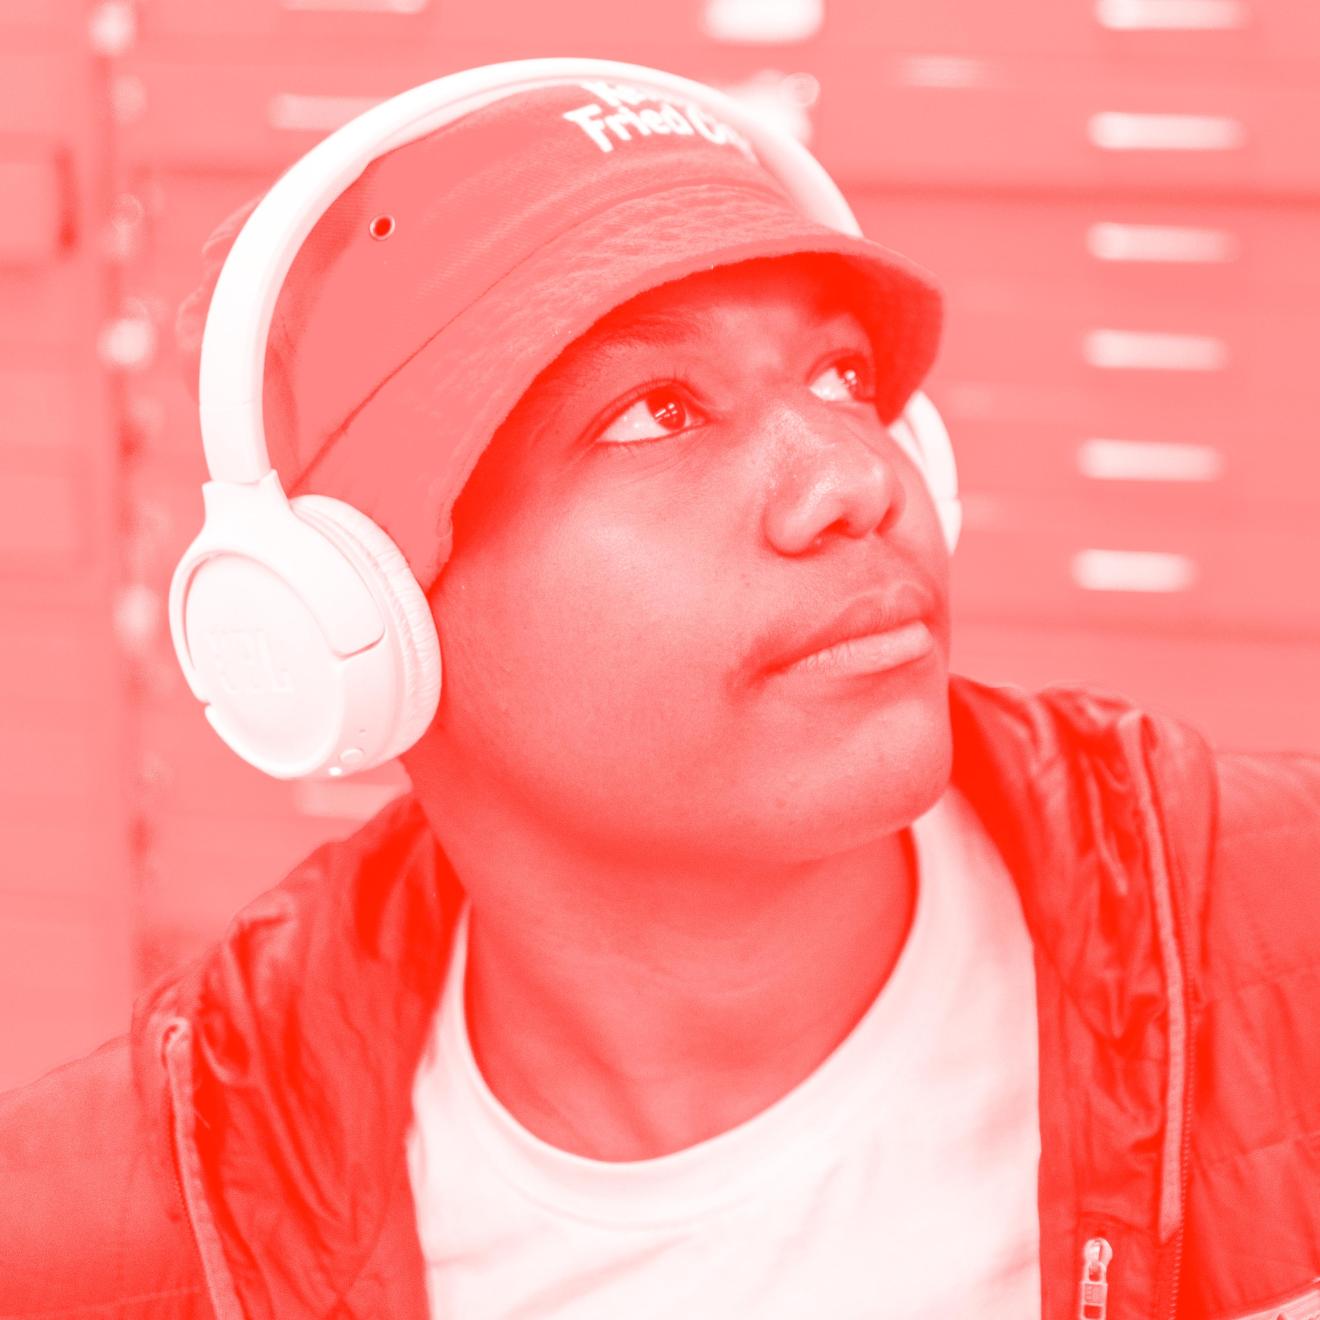 Male high school student wearing a bucket hat and headphones.